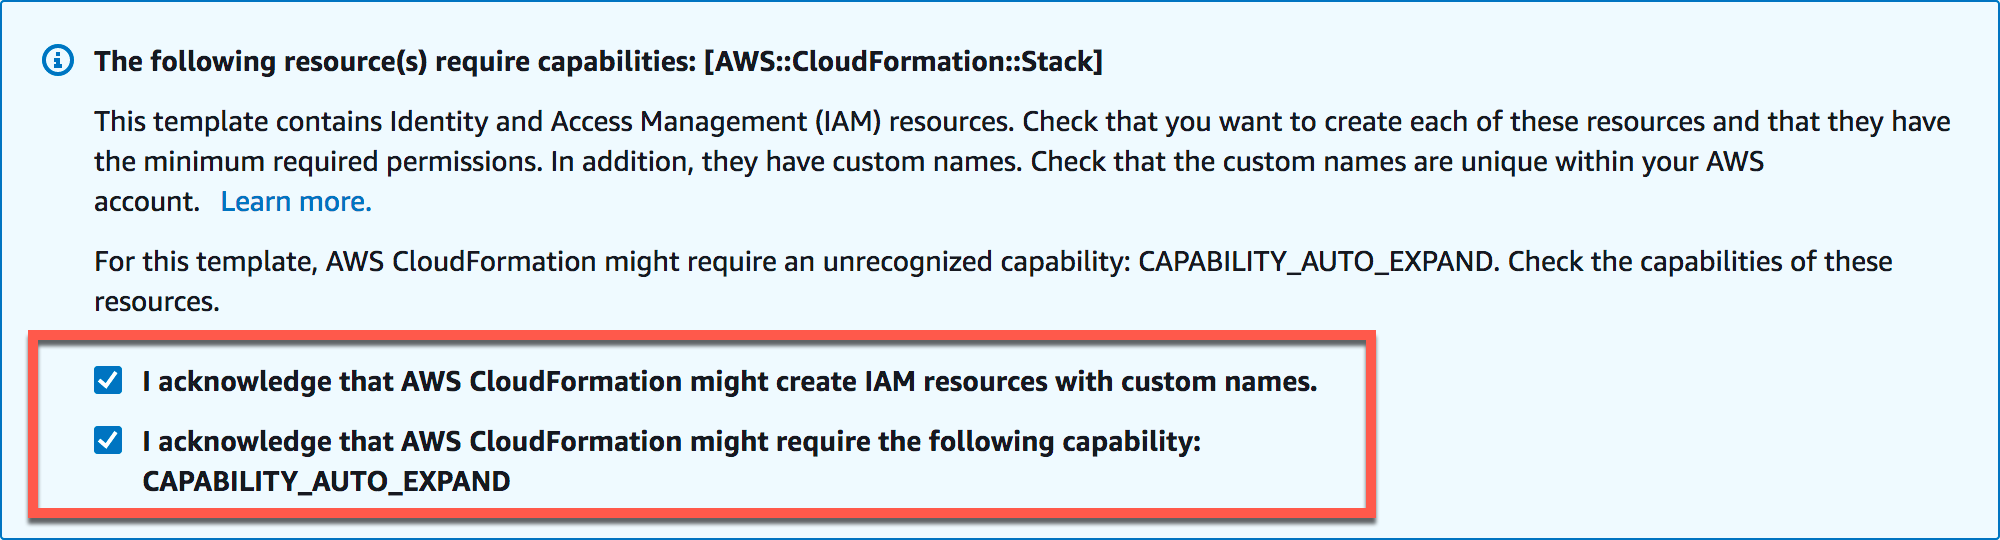 cloudformation-capabilities.png